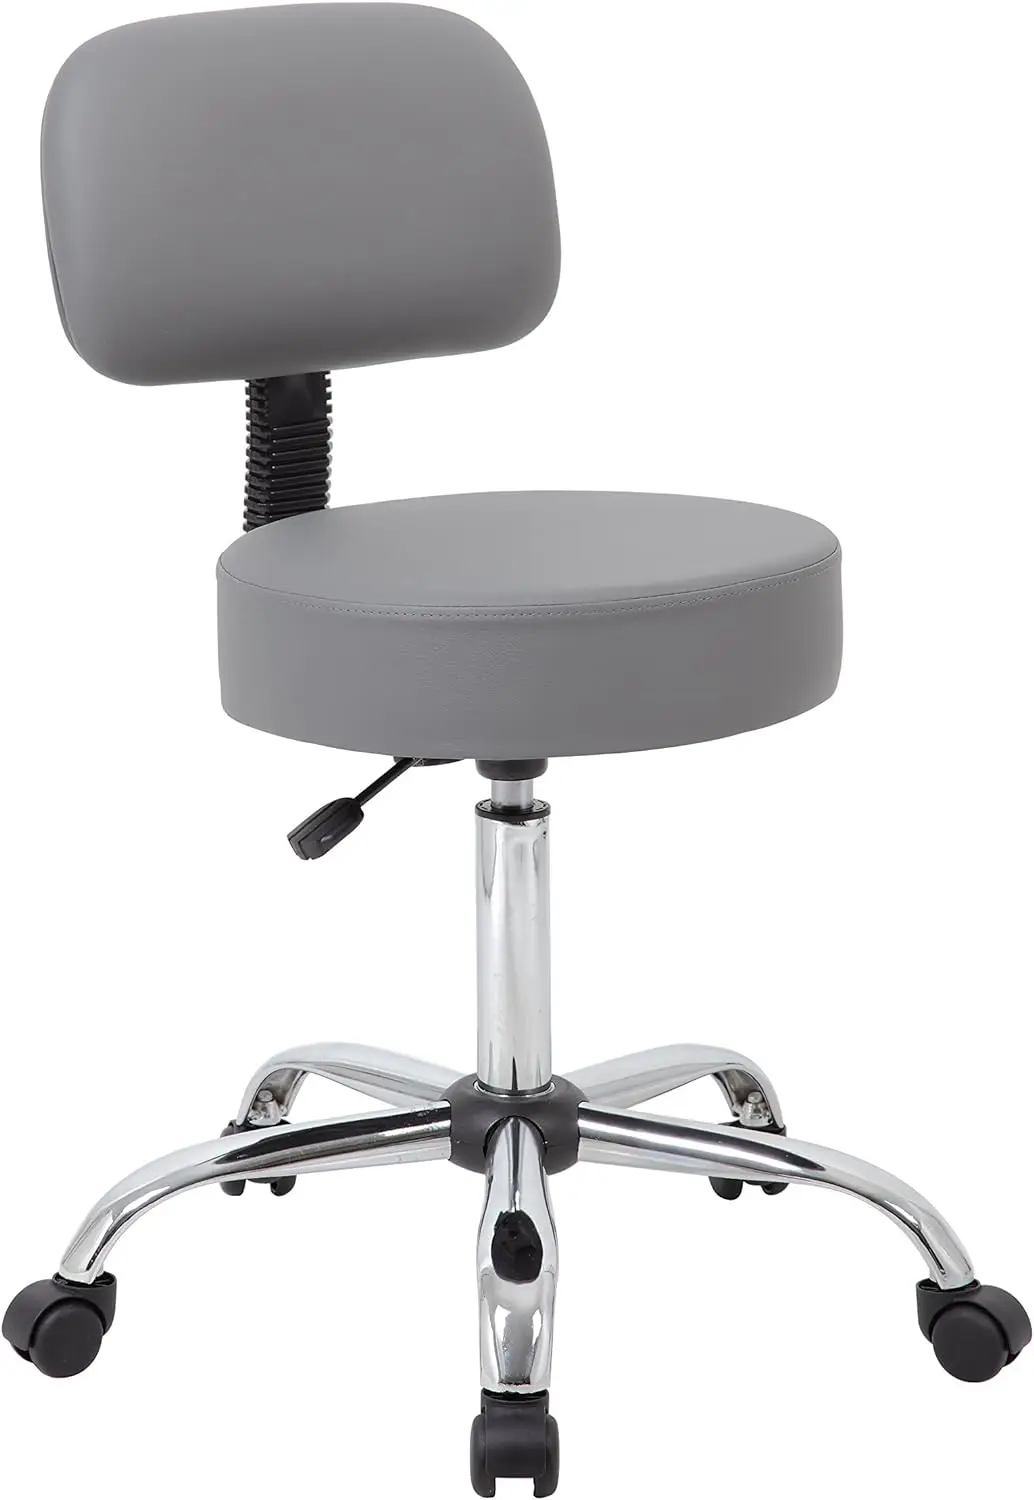 

Well Medical Spa Professional Adjustable Drafting Stool with Back, Grey